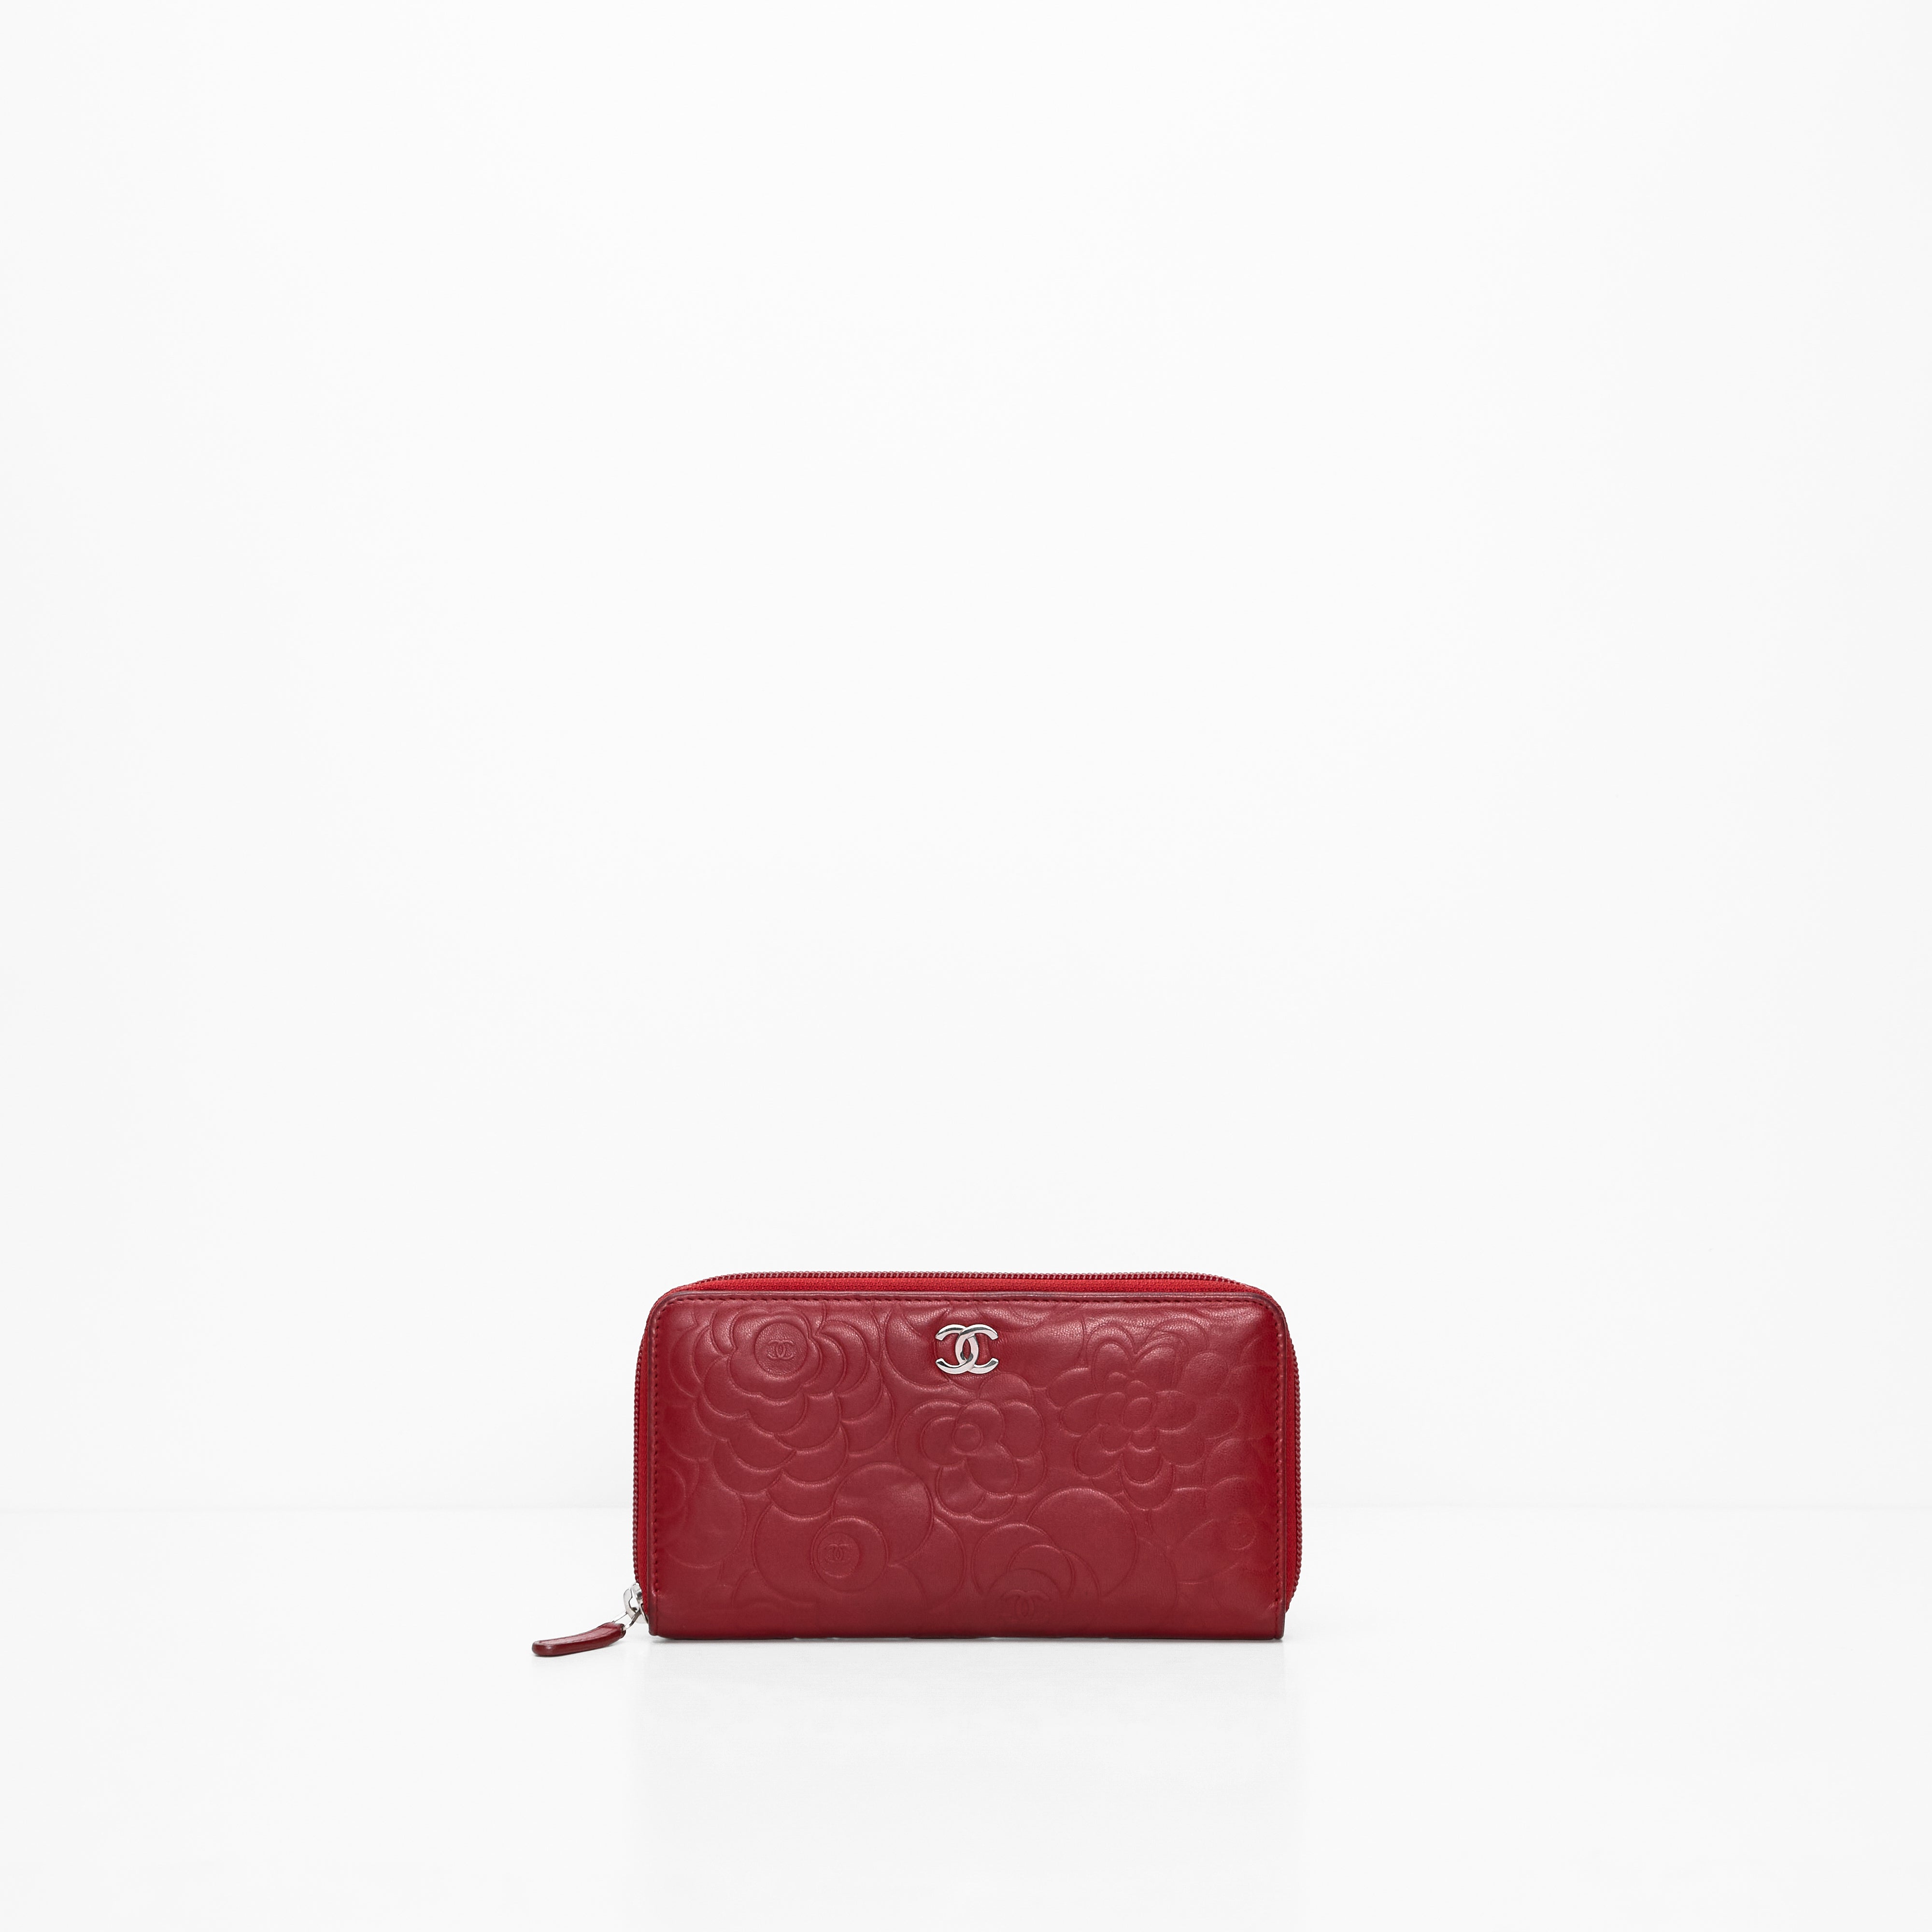 Chanel Red Embossed Camlia Ziparound Wallet